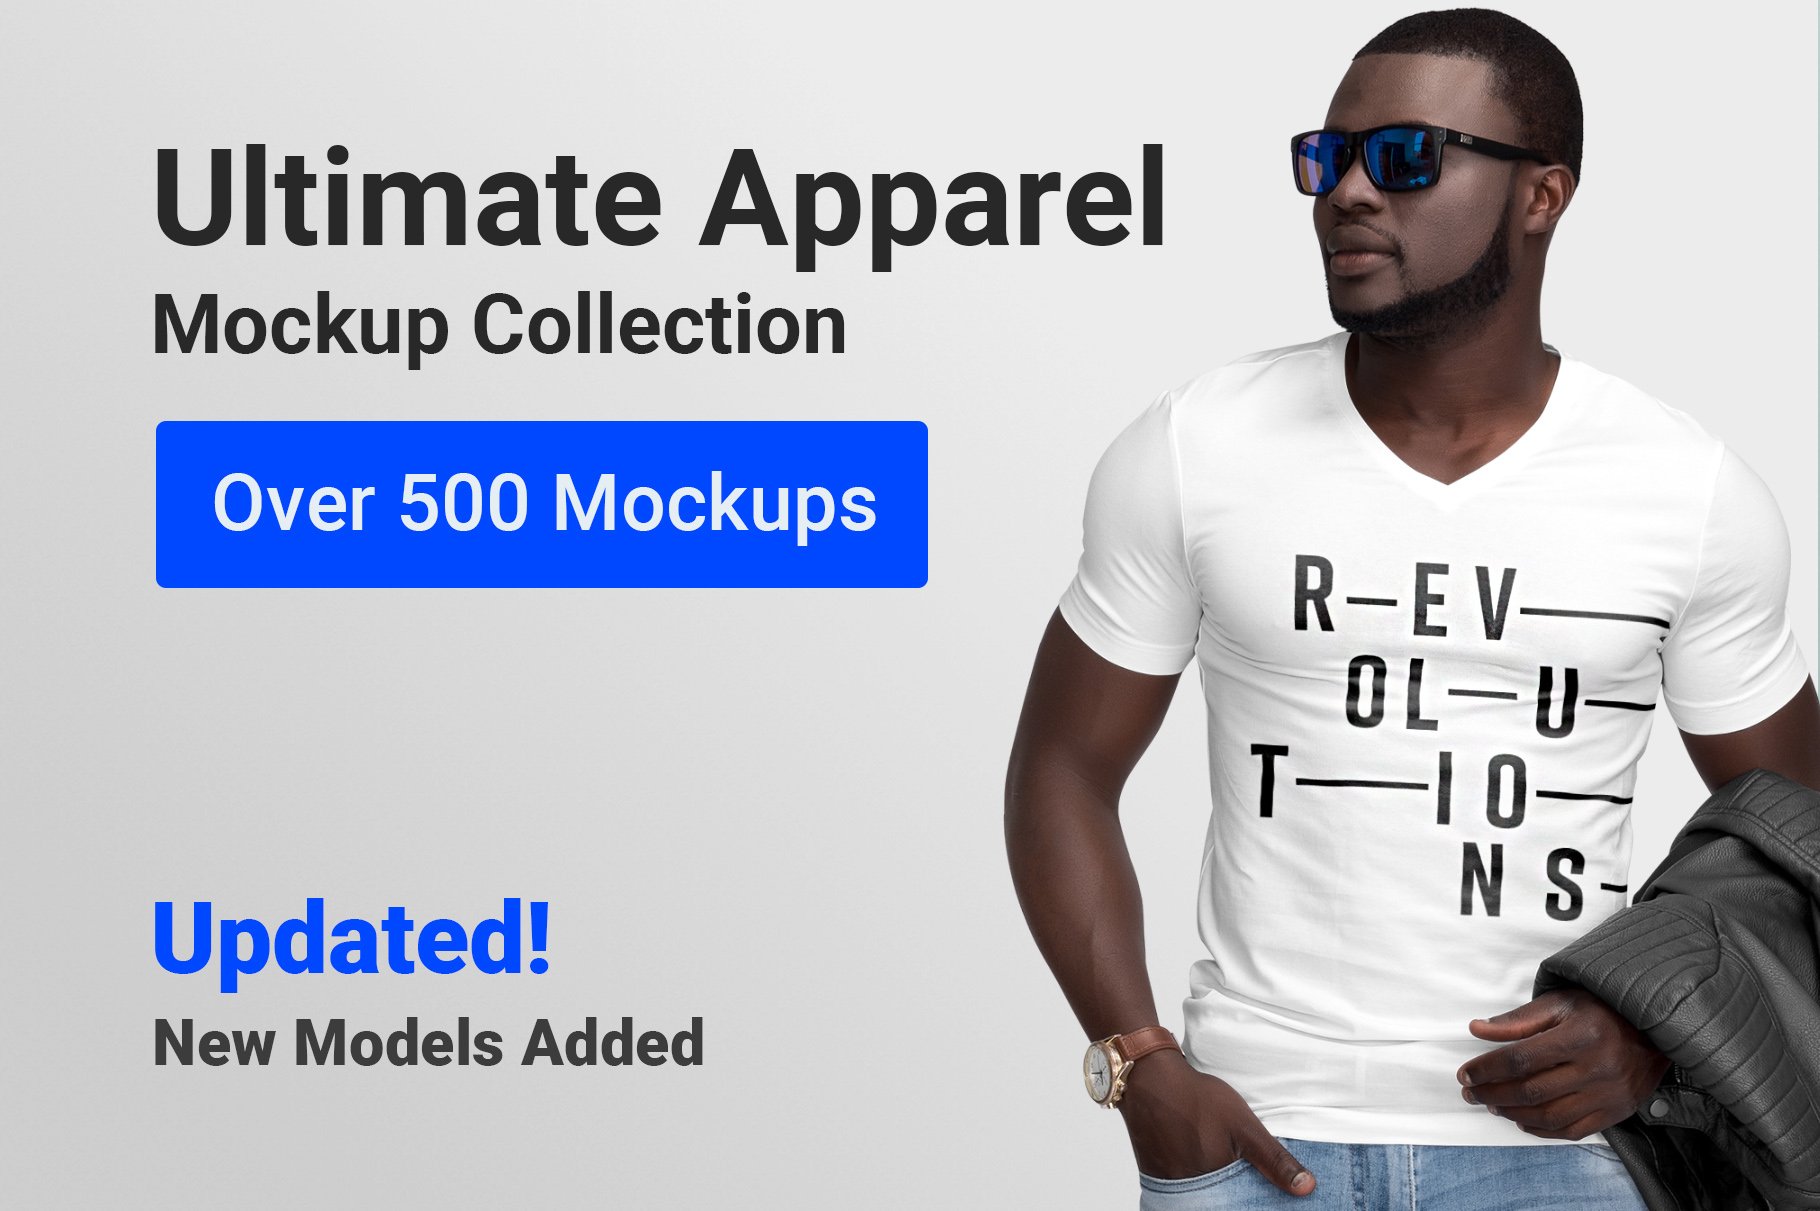 Ultimate Apparel Mockup Collection cover image.